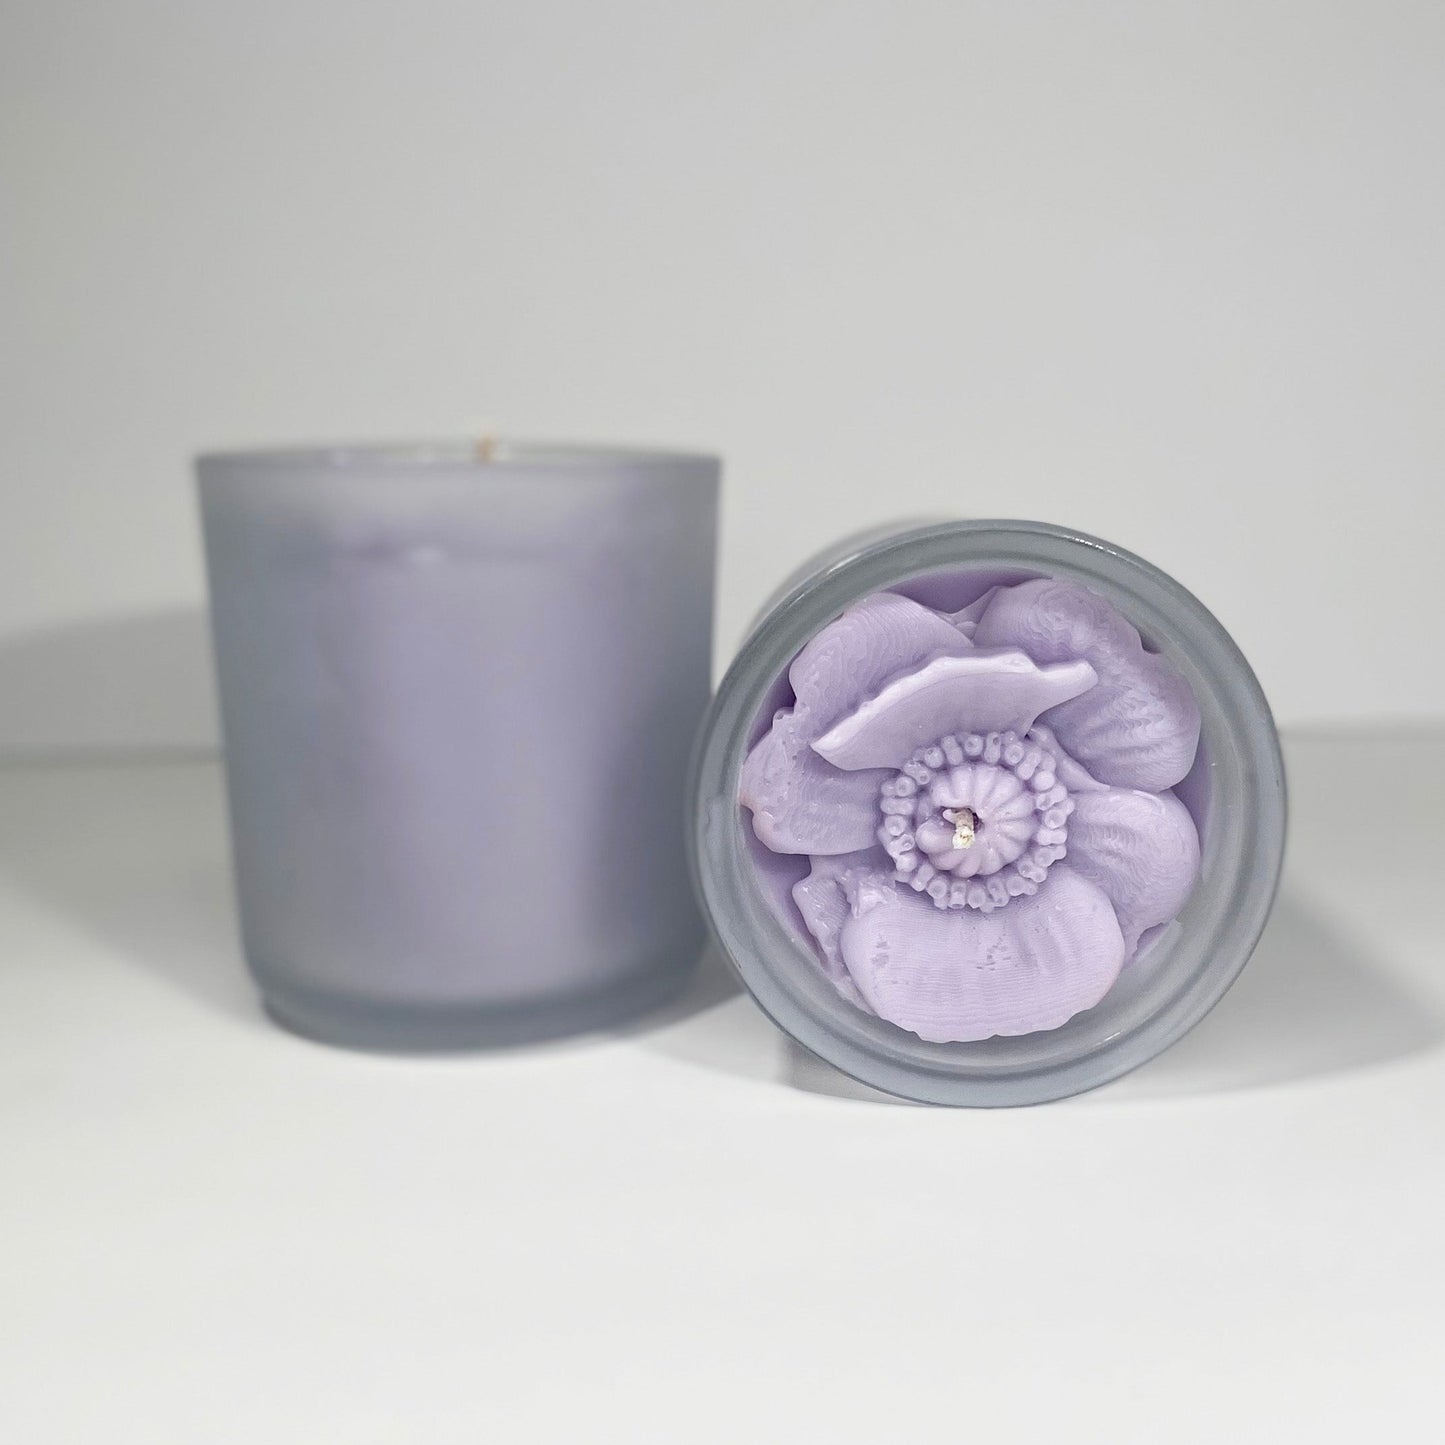 Poppy Flower Top Candle - Eco-Friendly